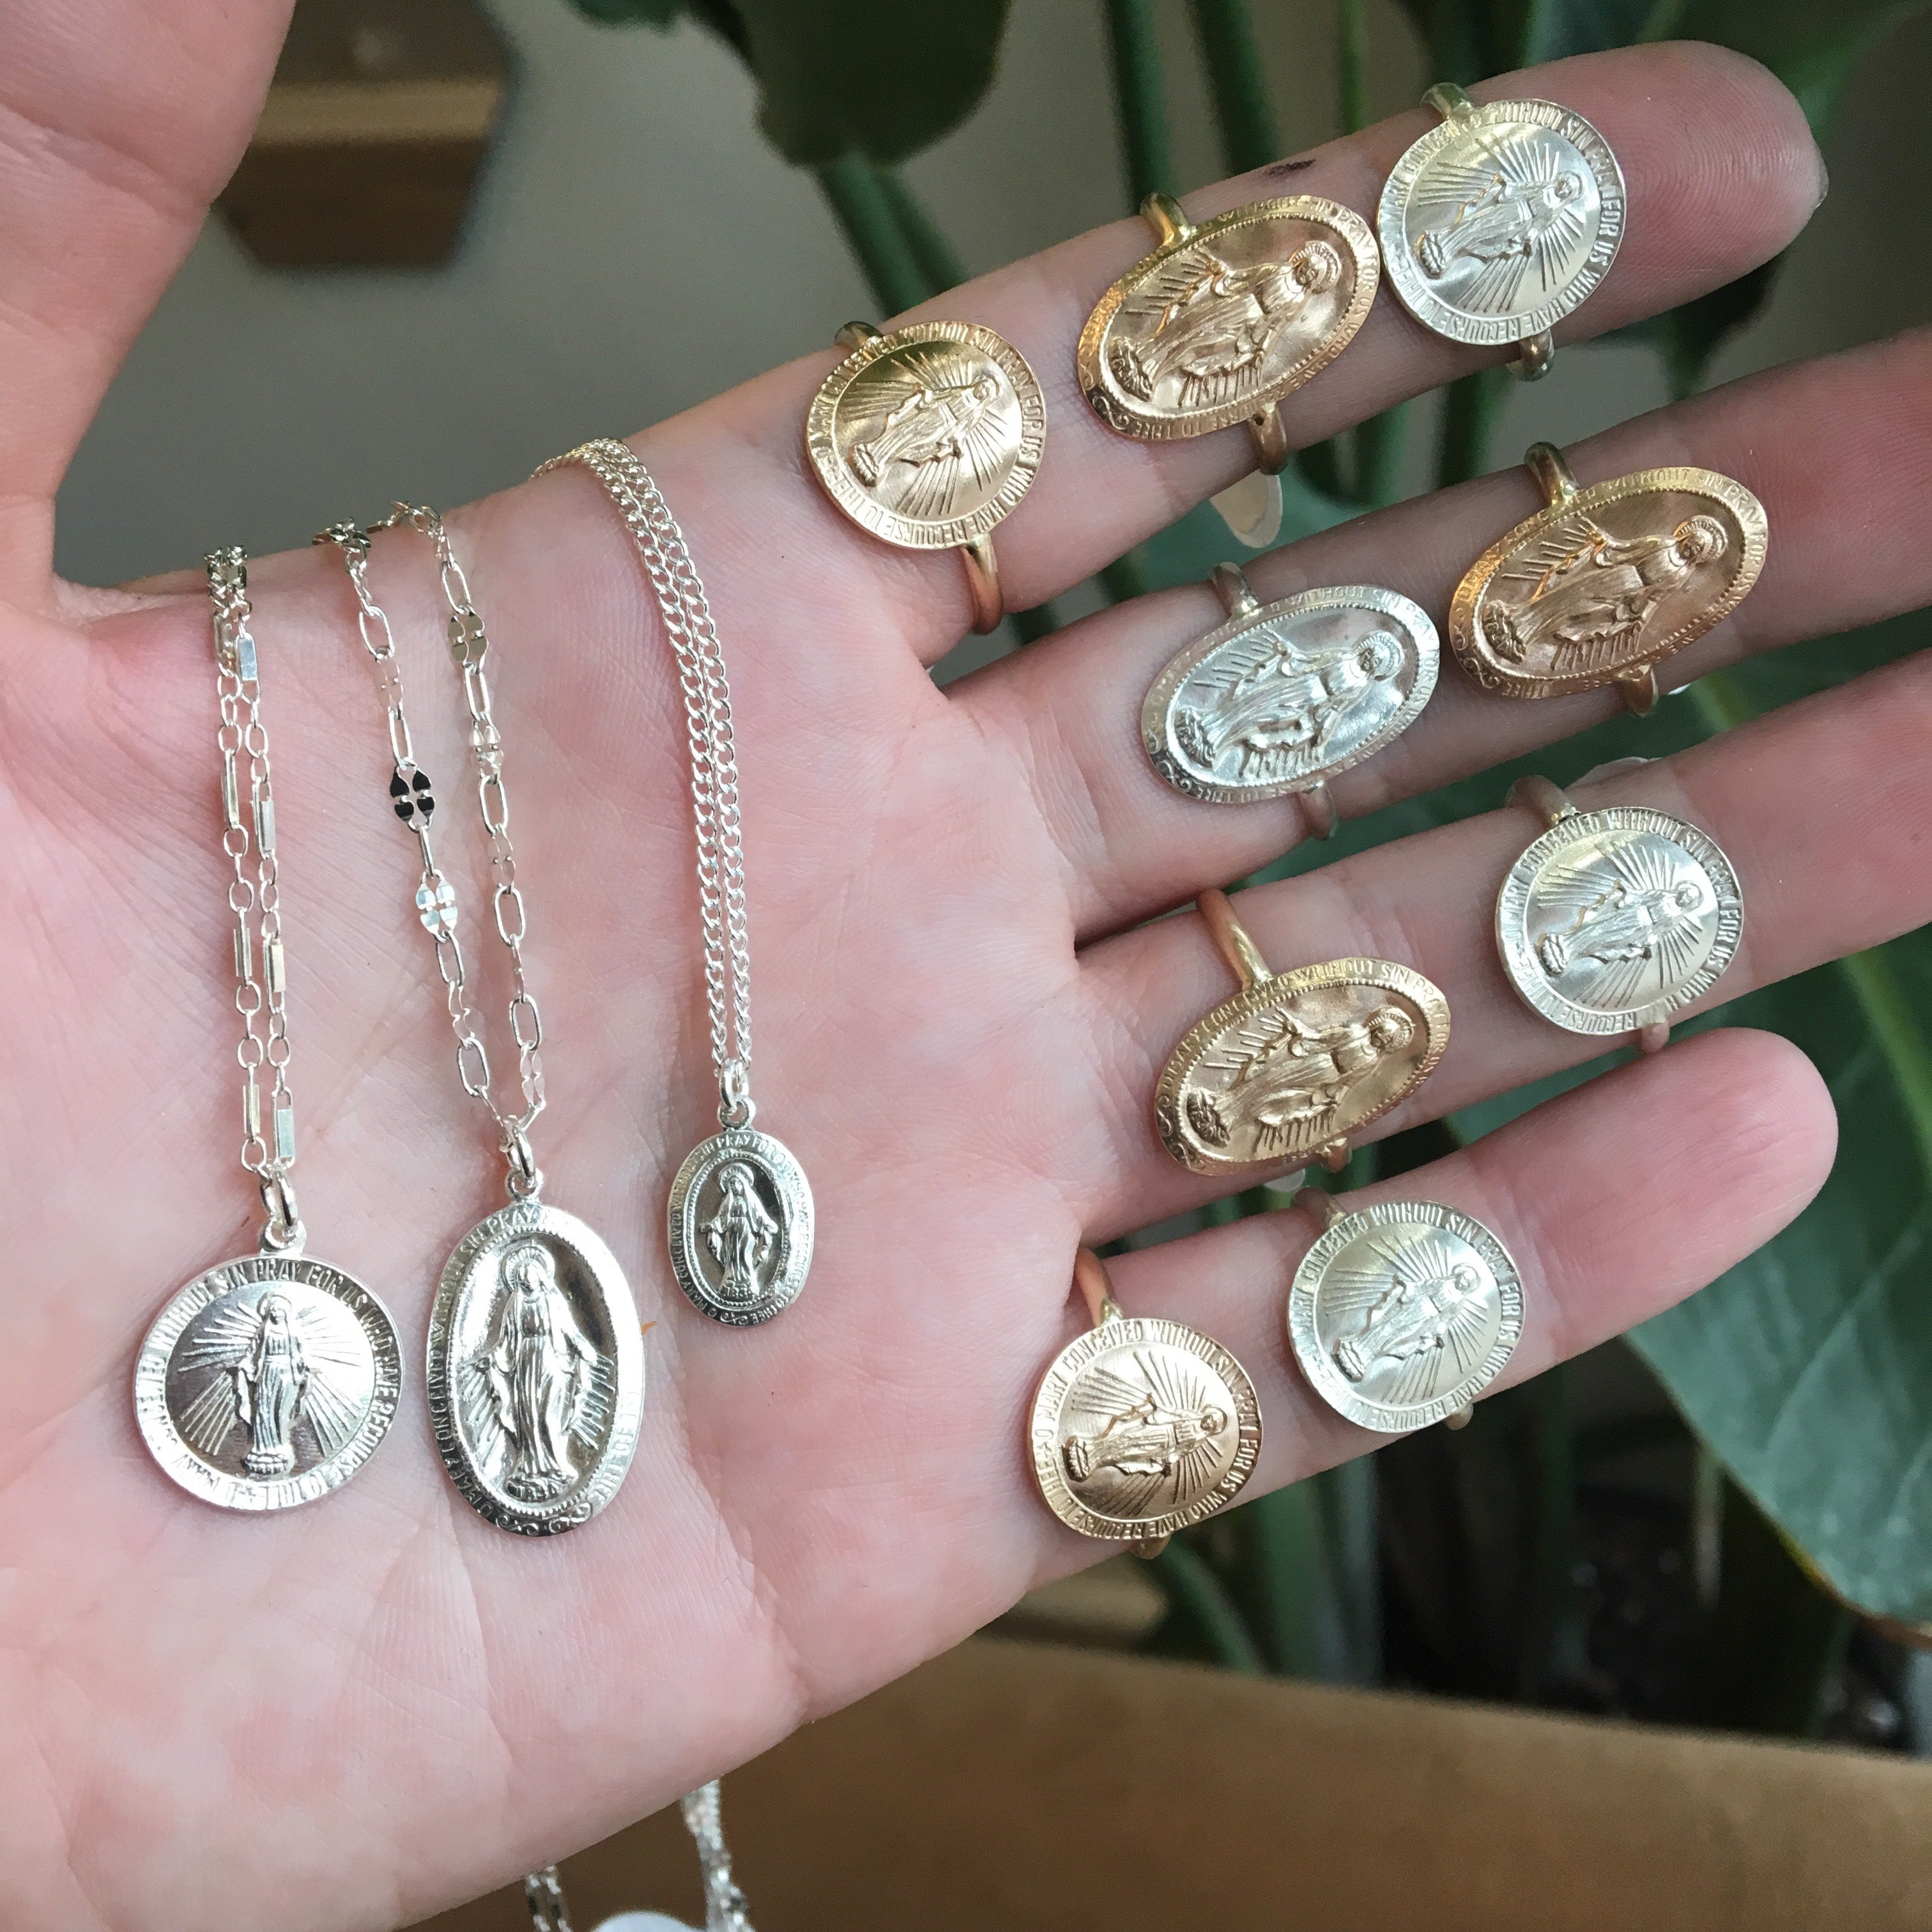 Mother Mary Coin Necklace | Glamrocks Jewelry